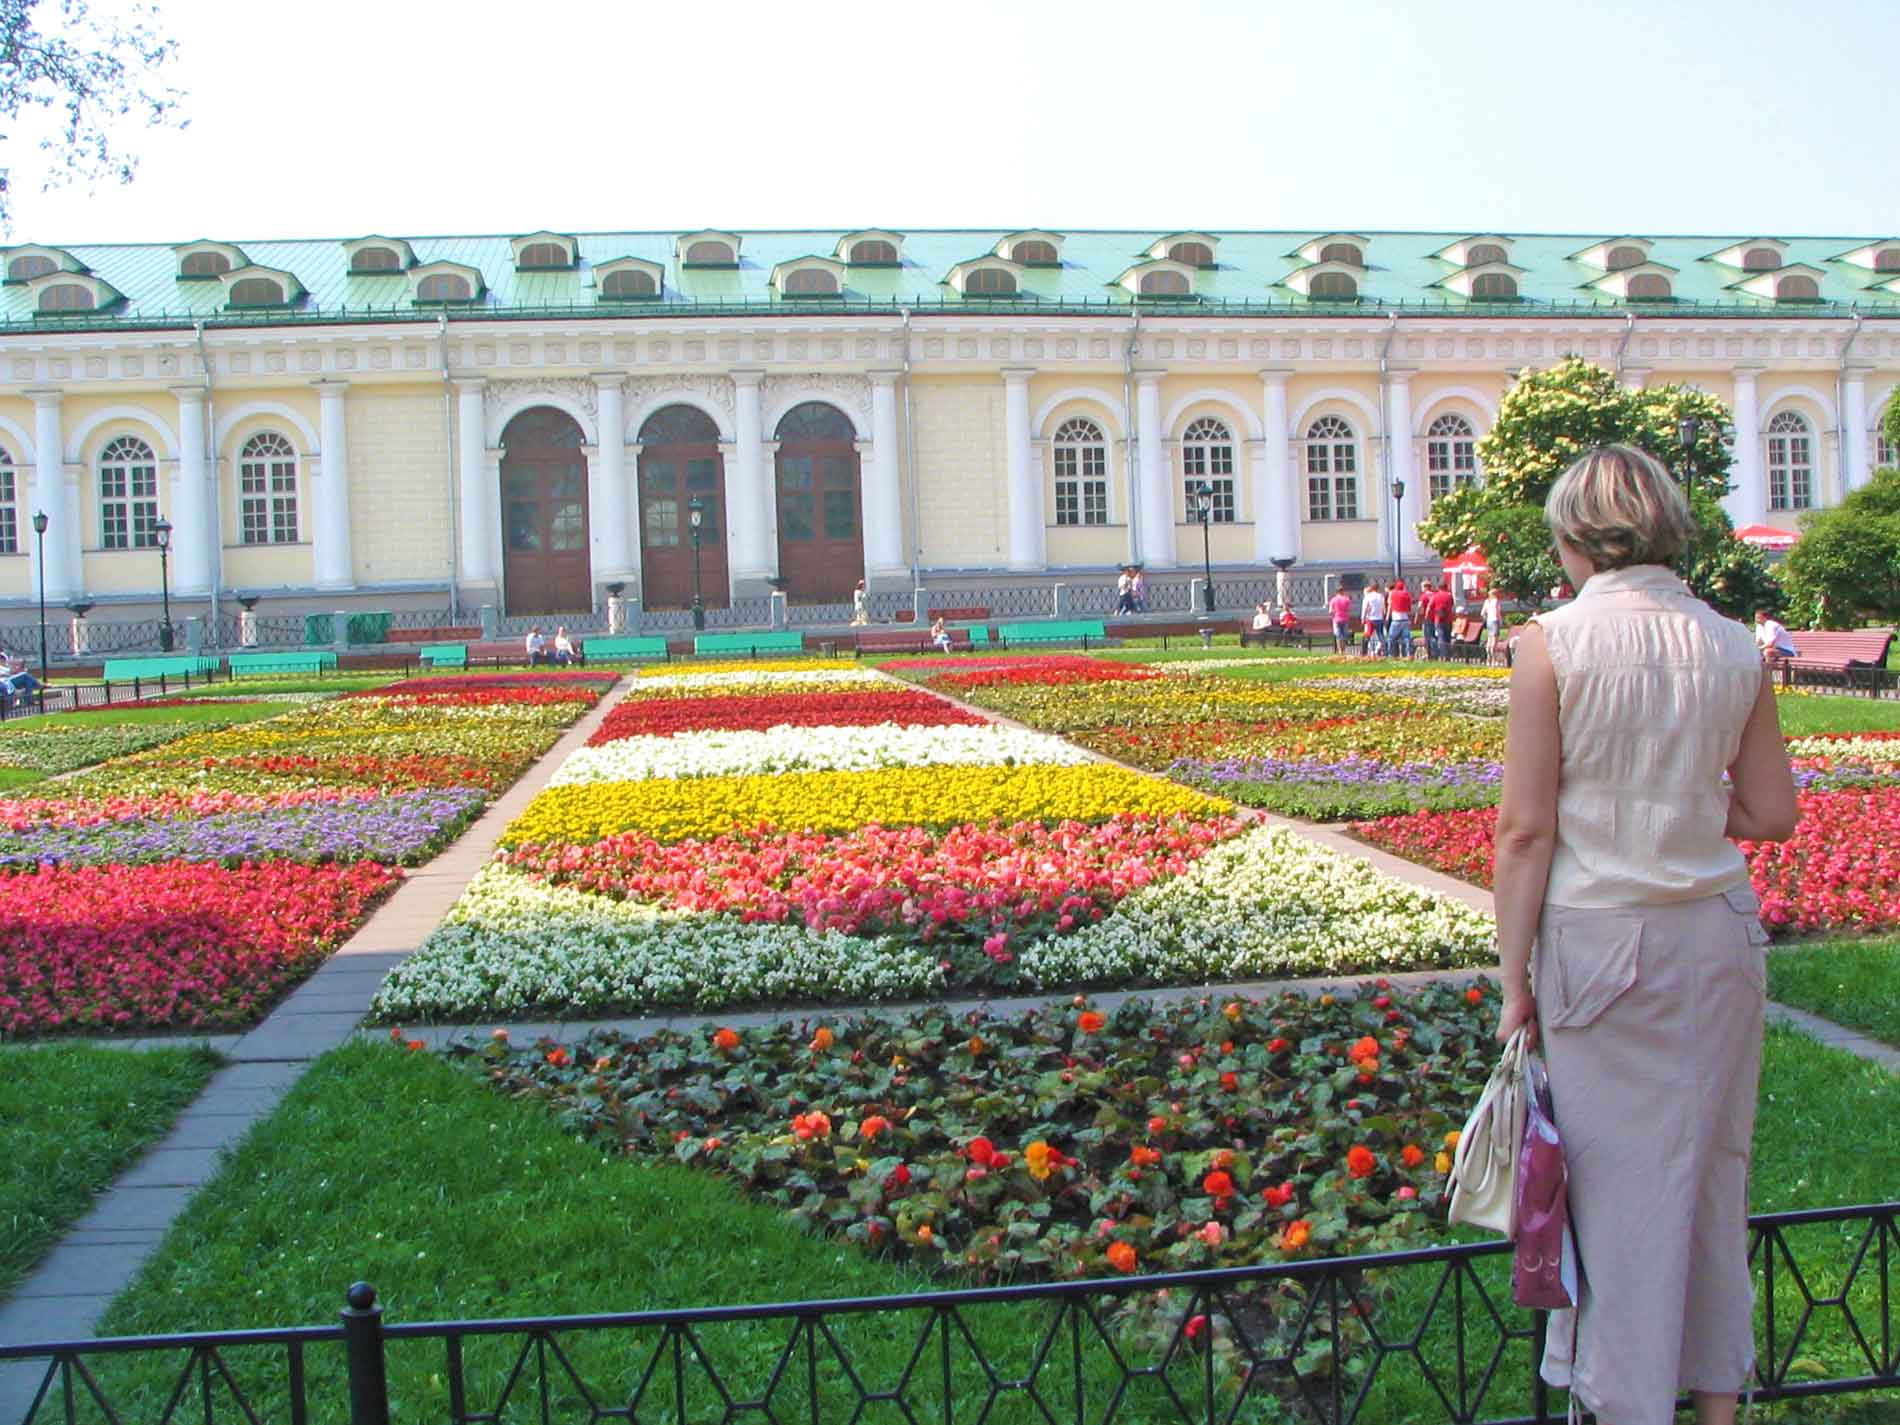 A Flower Bed In The Gardens Surrounding Red Square